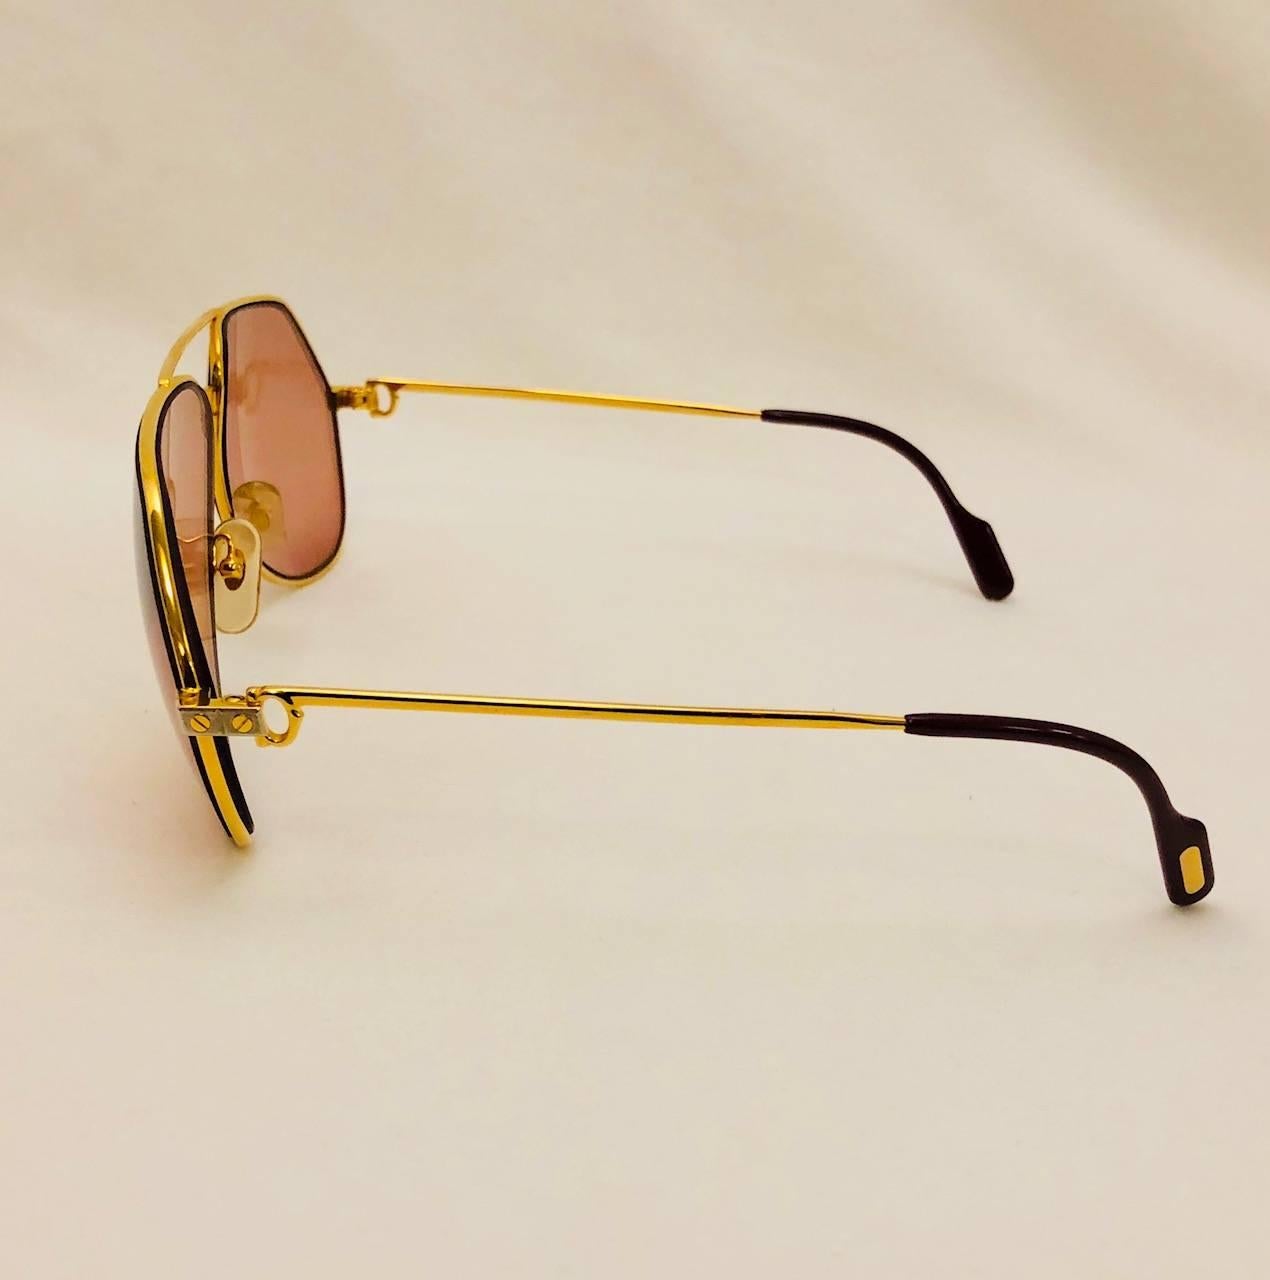 Cartier is renown for crafting some of the most desired aviator sunglasses in the world!  These Vintage Vendome Santos Satin sunglasses feature gold tone frame, signature temple tips, and two tone hardware on bridge and temples.  Unisex design. 
